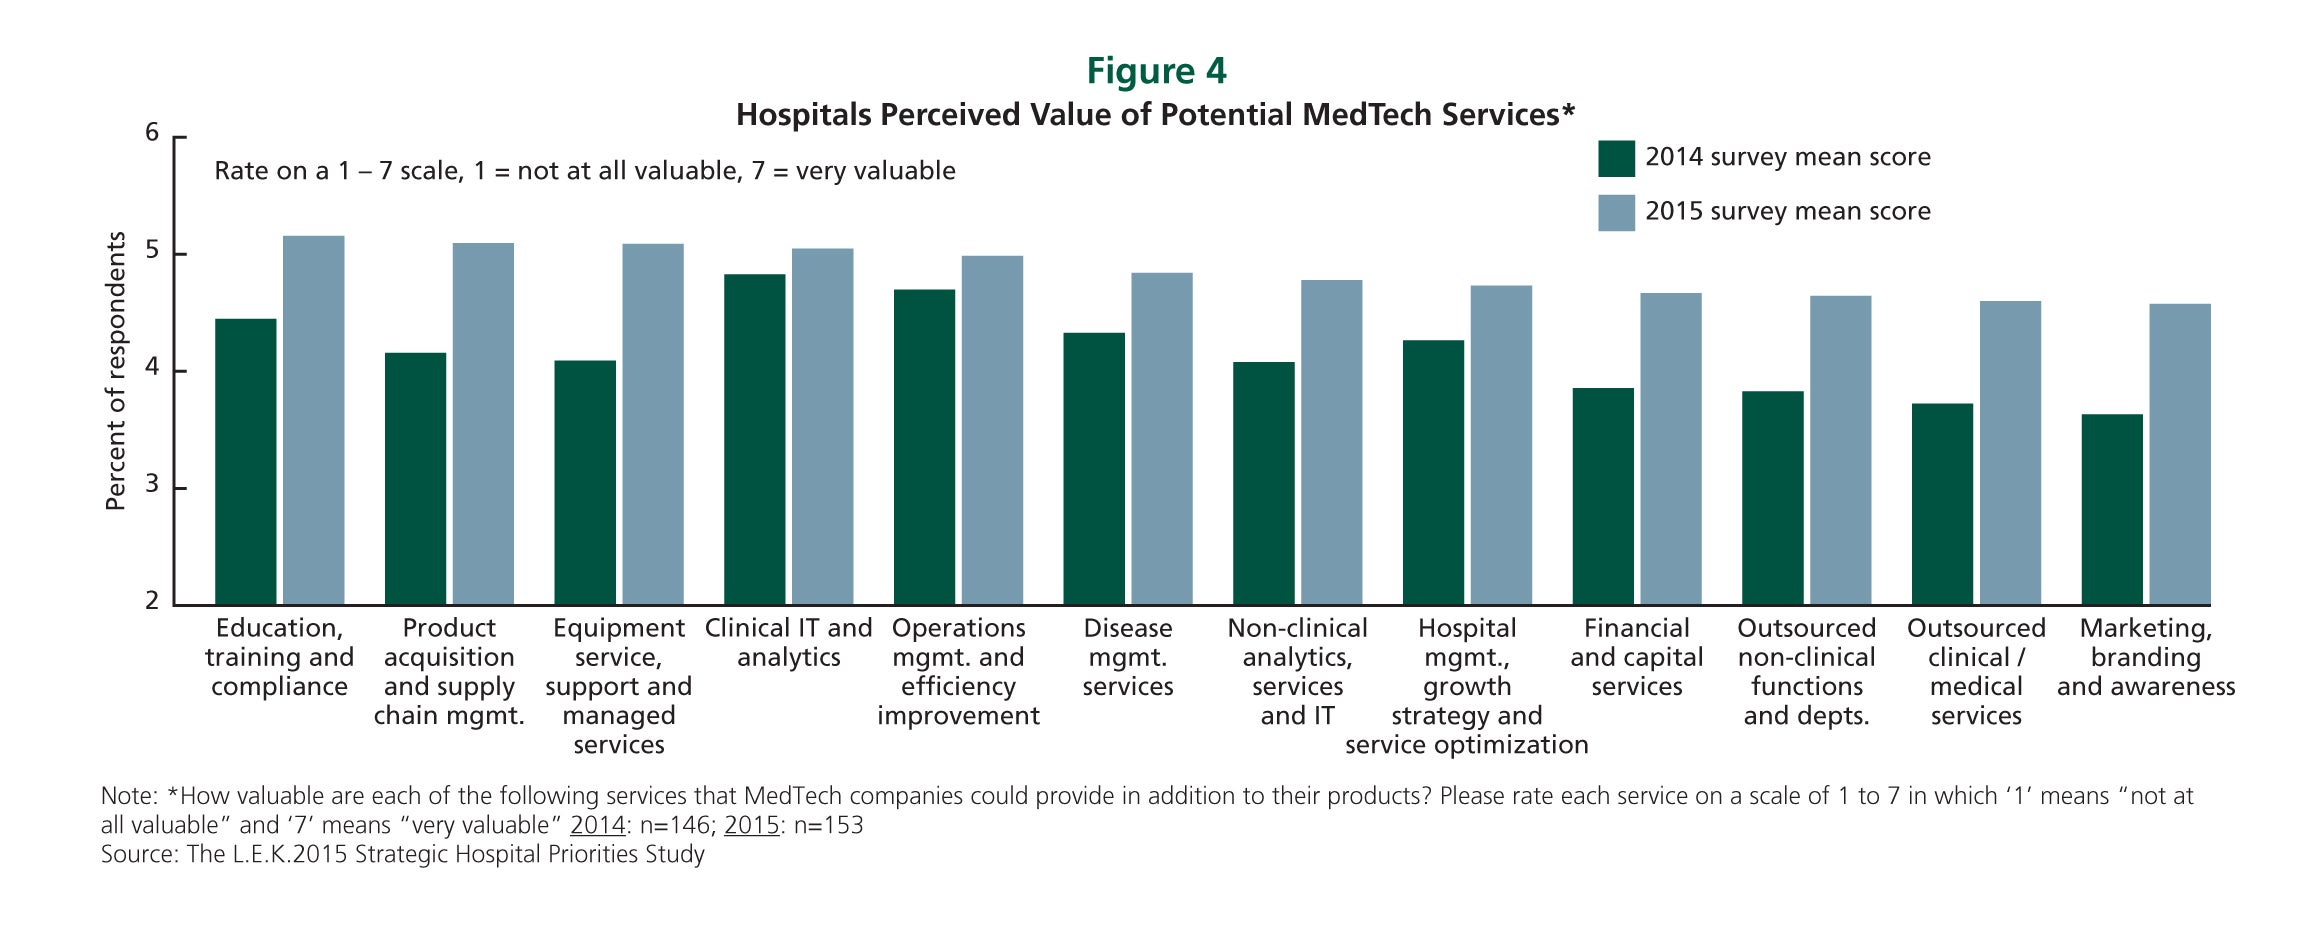 Hospitals Perceived Value of Potential MedTech Services